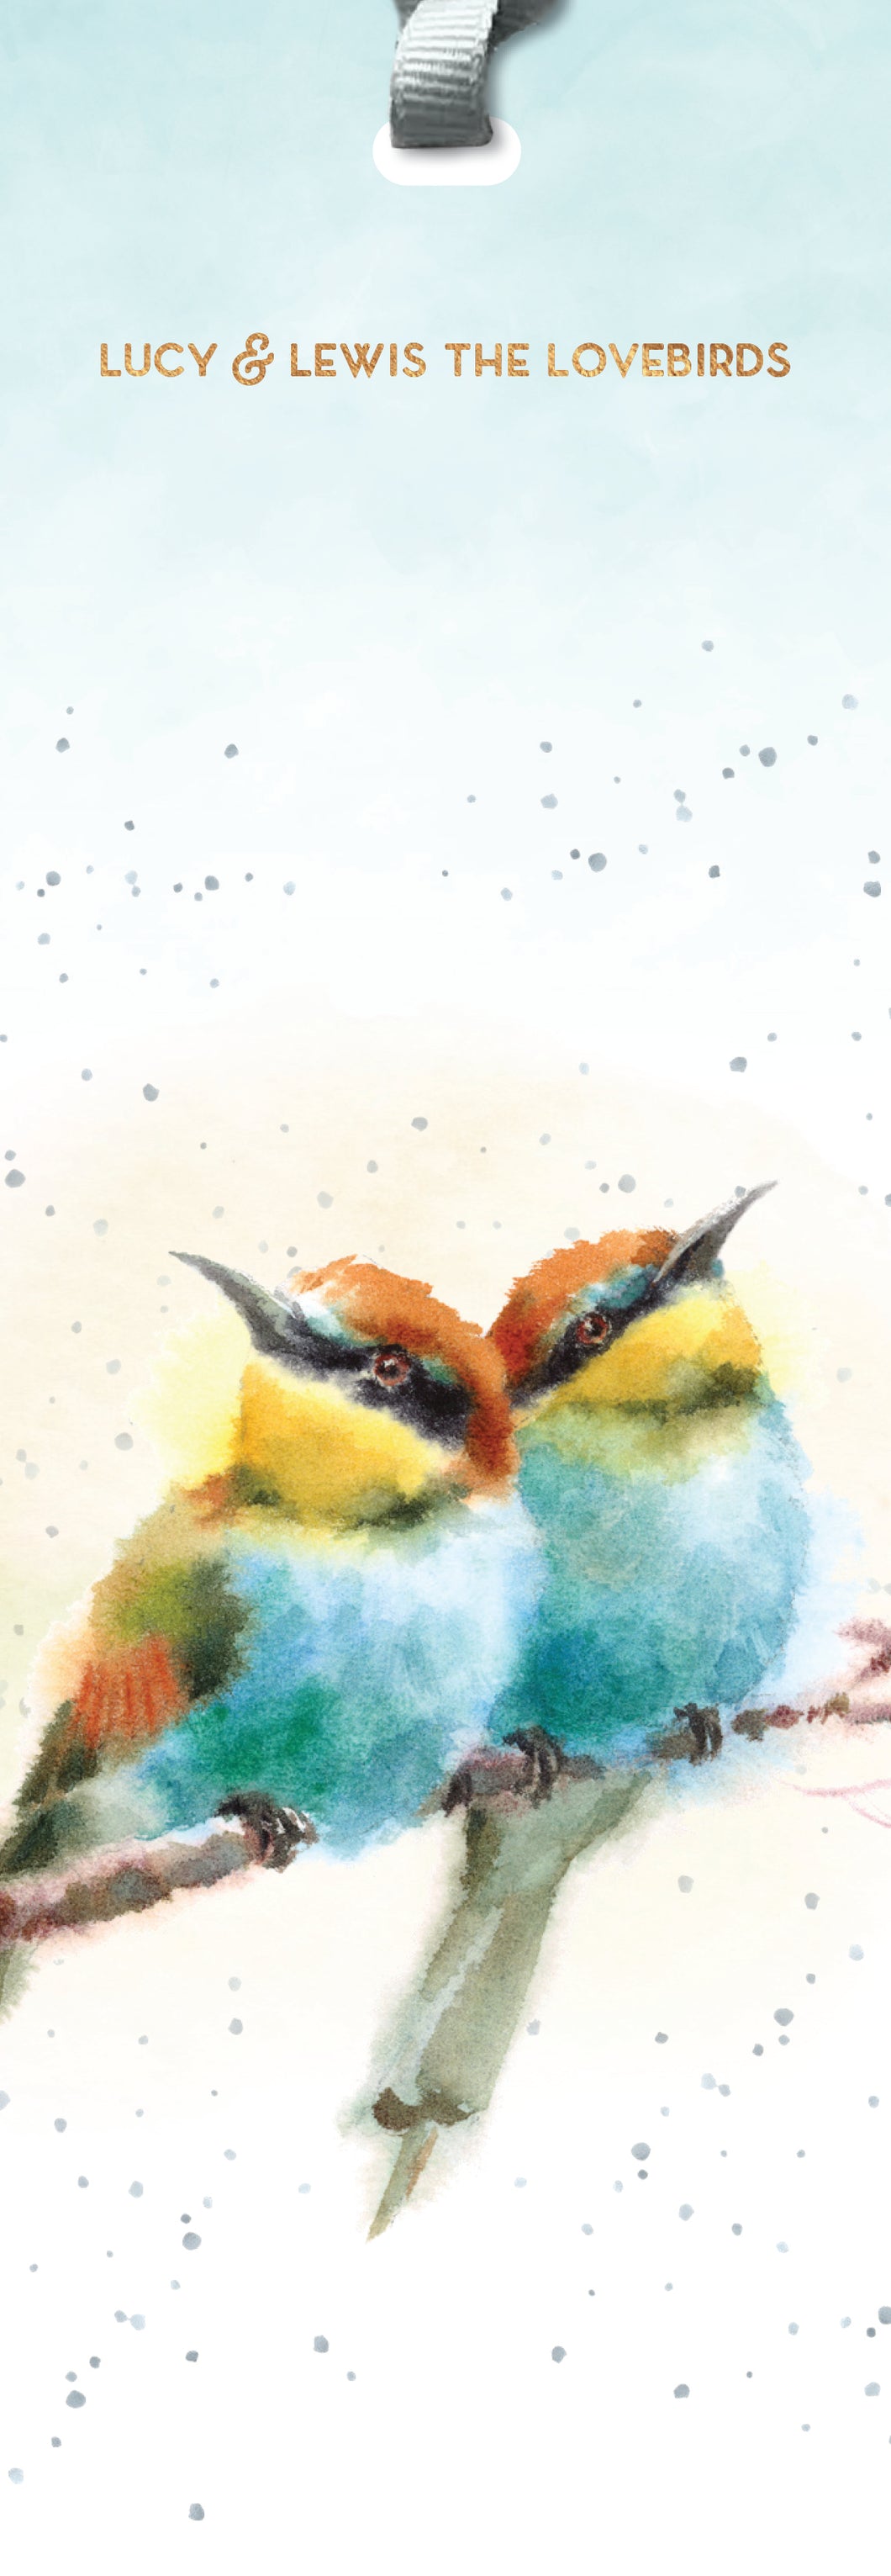 Lucy & Lewis the Lovebirds Bookmark